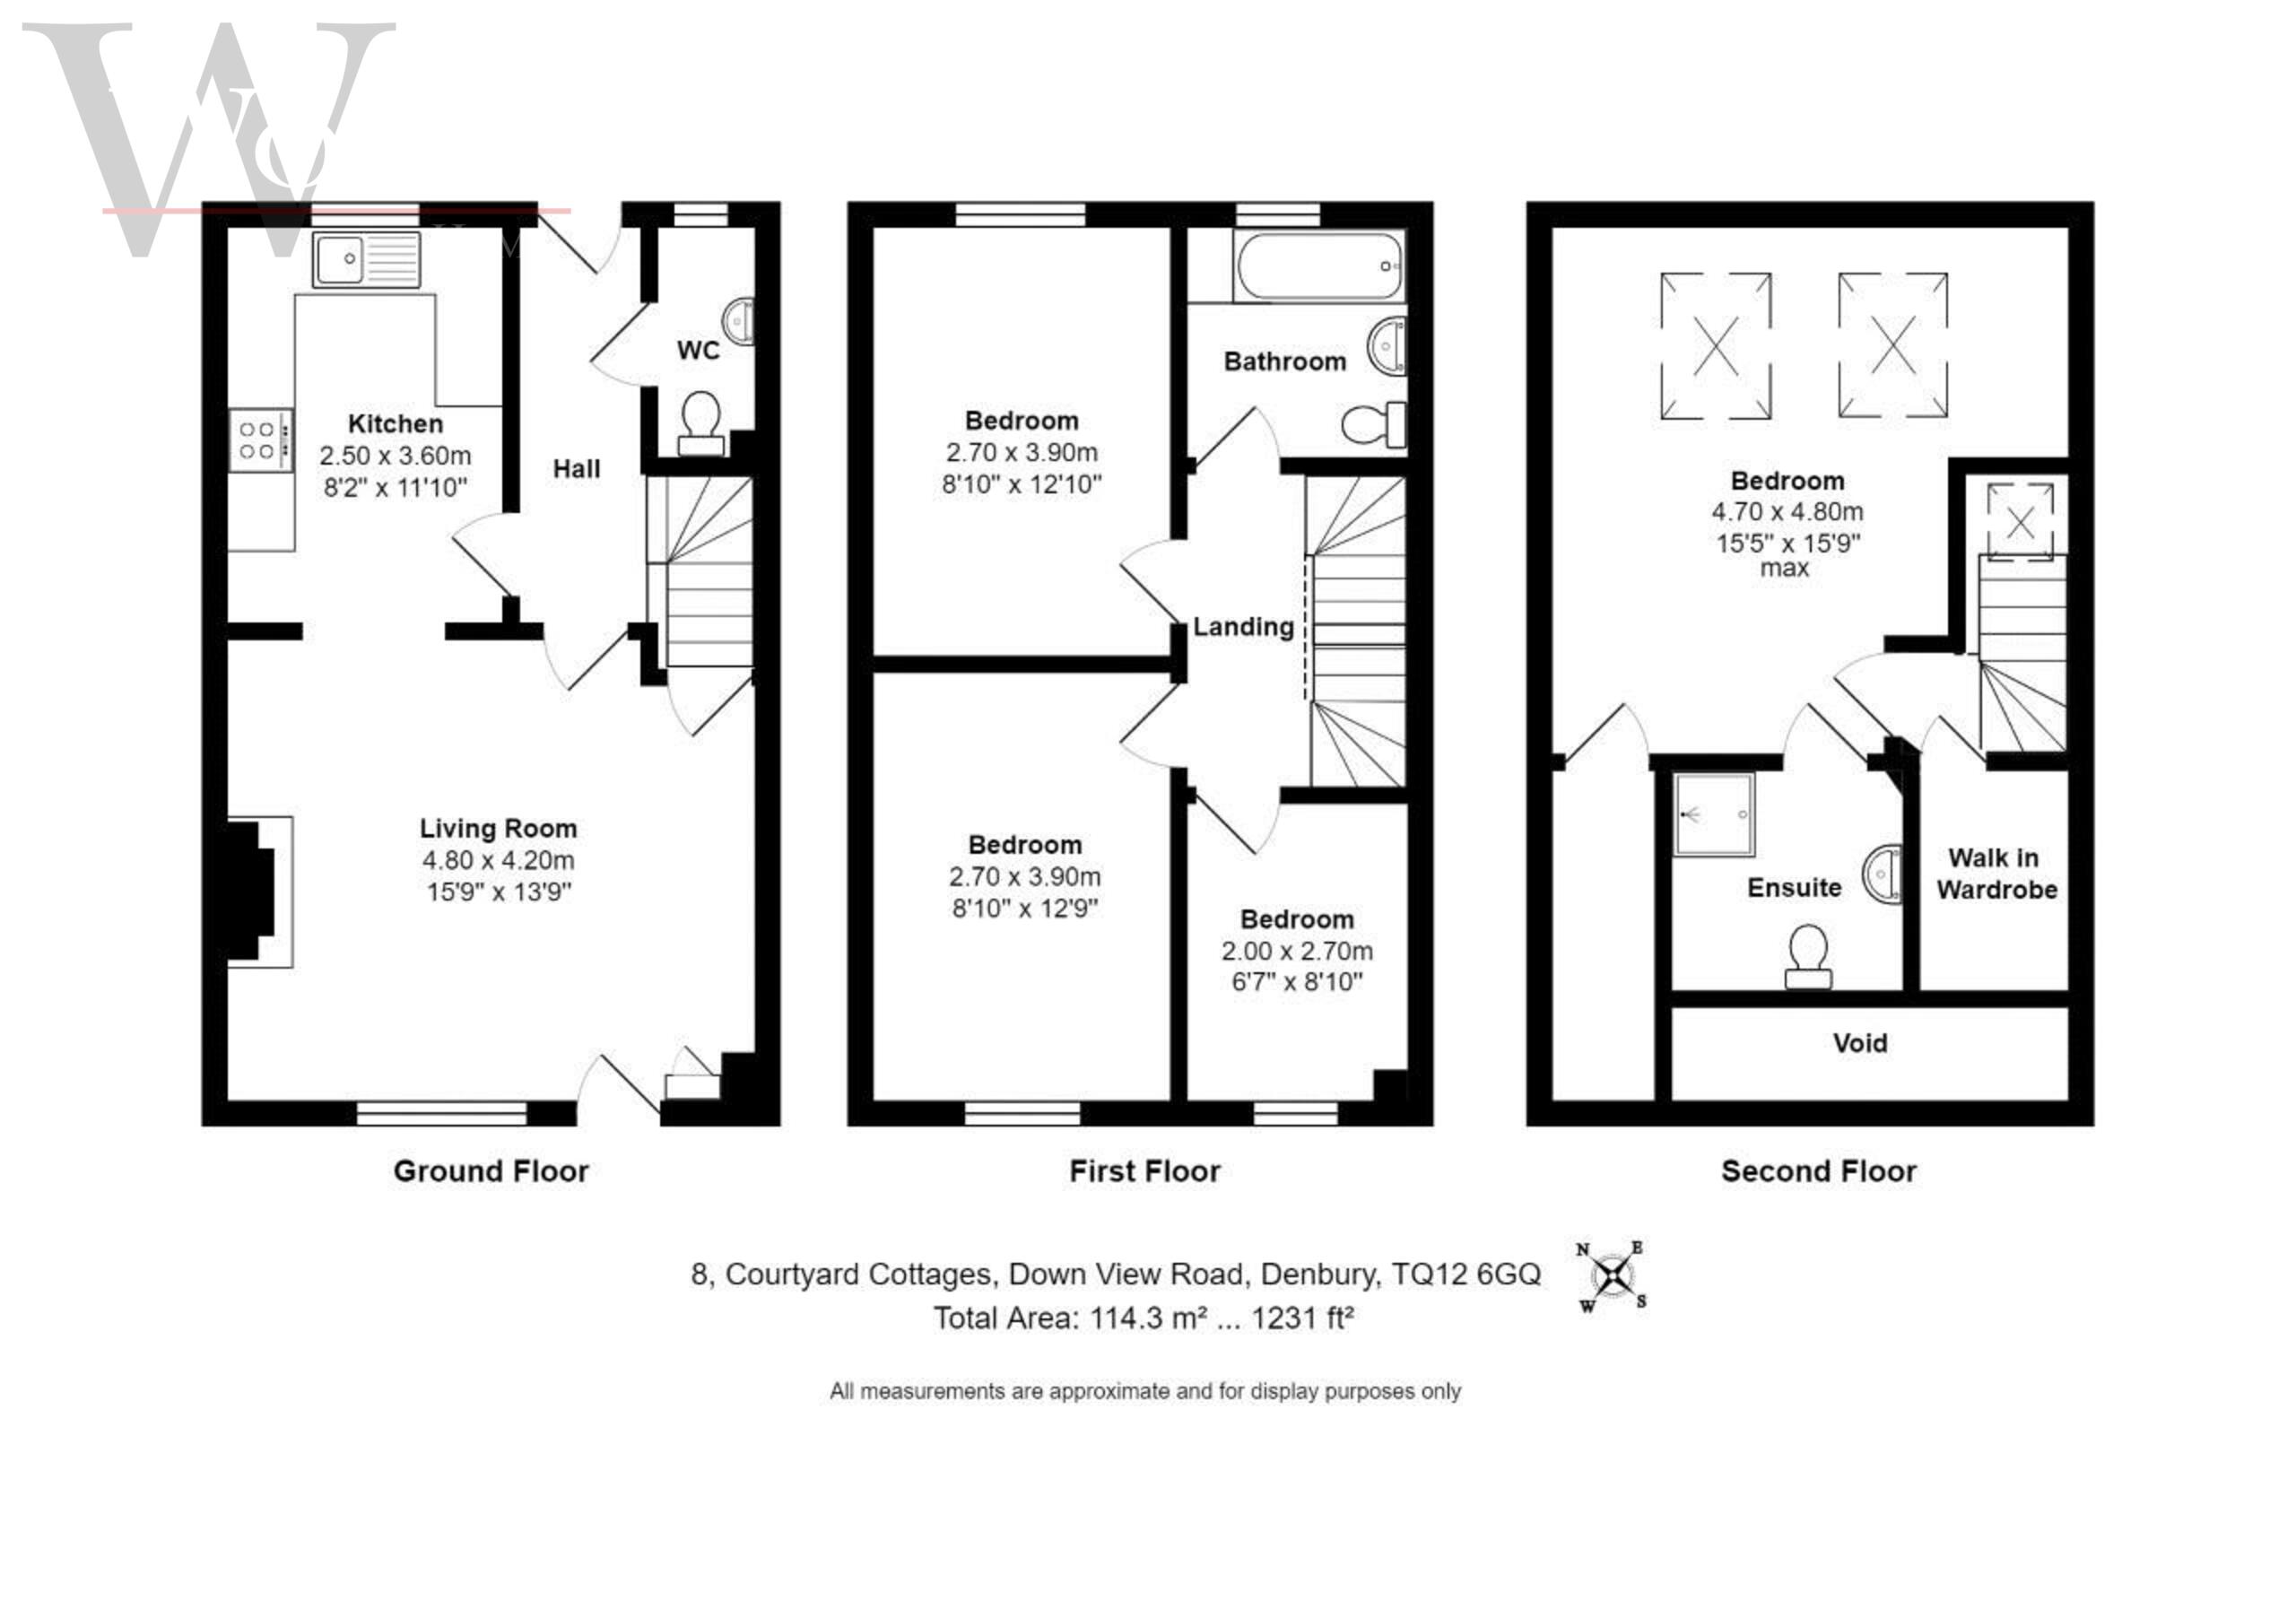 4 bed terraced house for sale in Denbury, Newton Abbot - Property floorplan